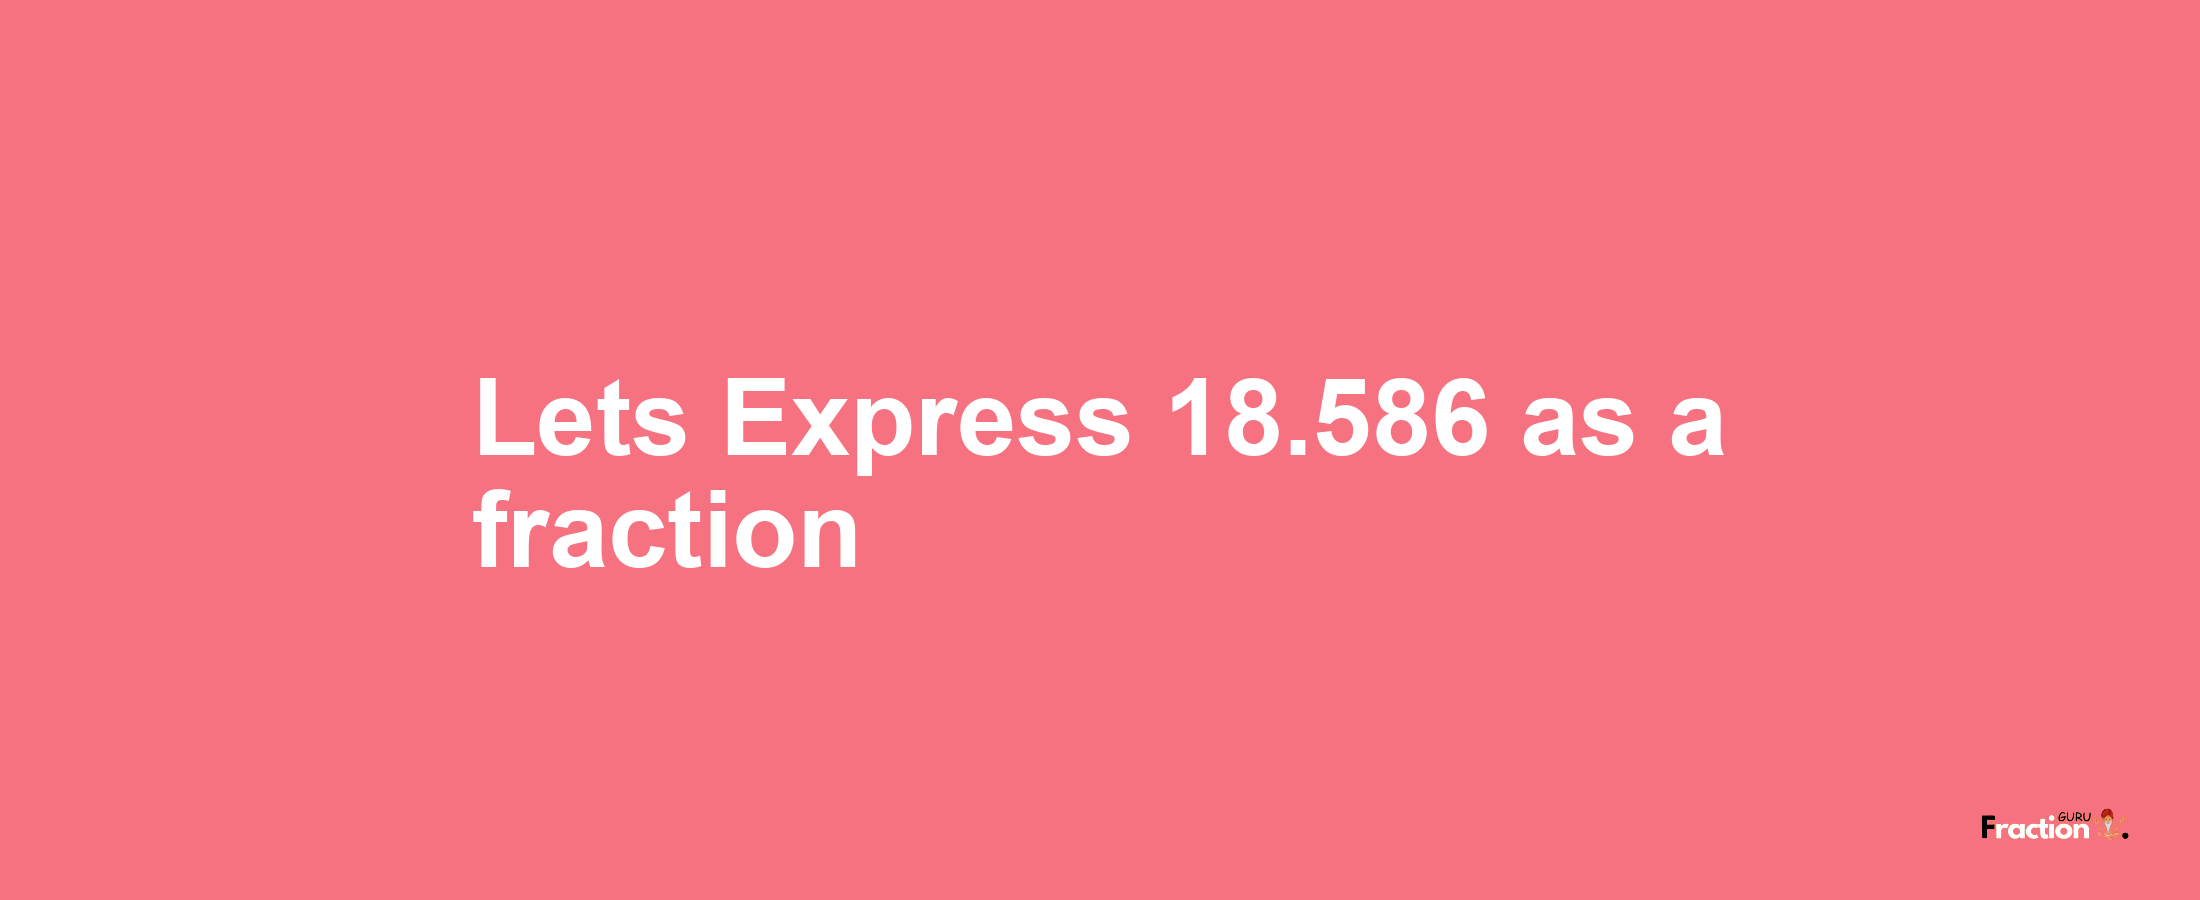 Lets Express 18.586 as afraction